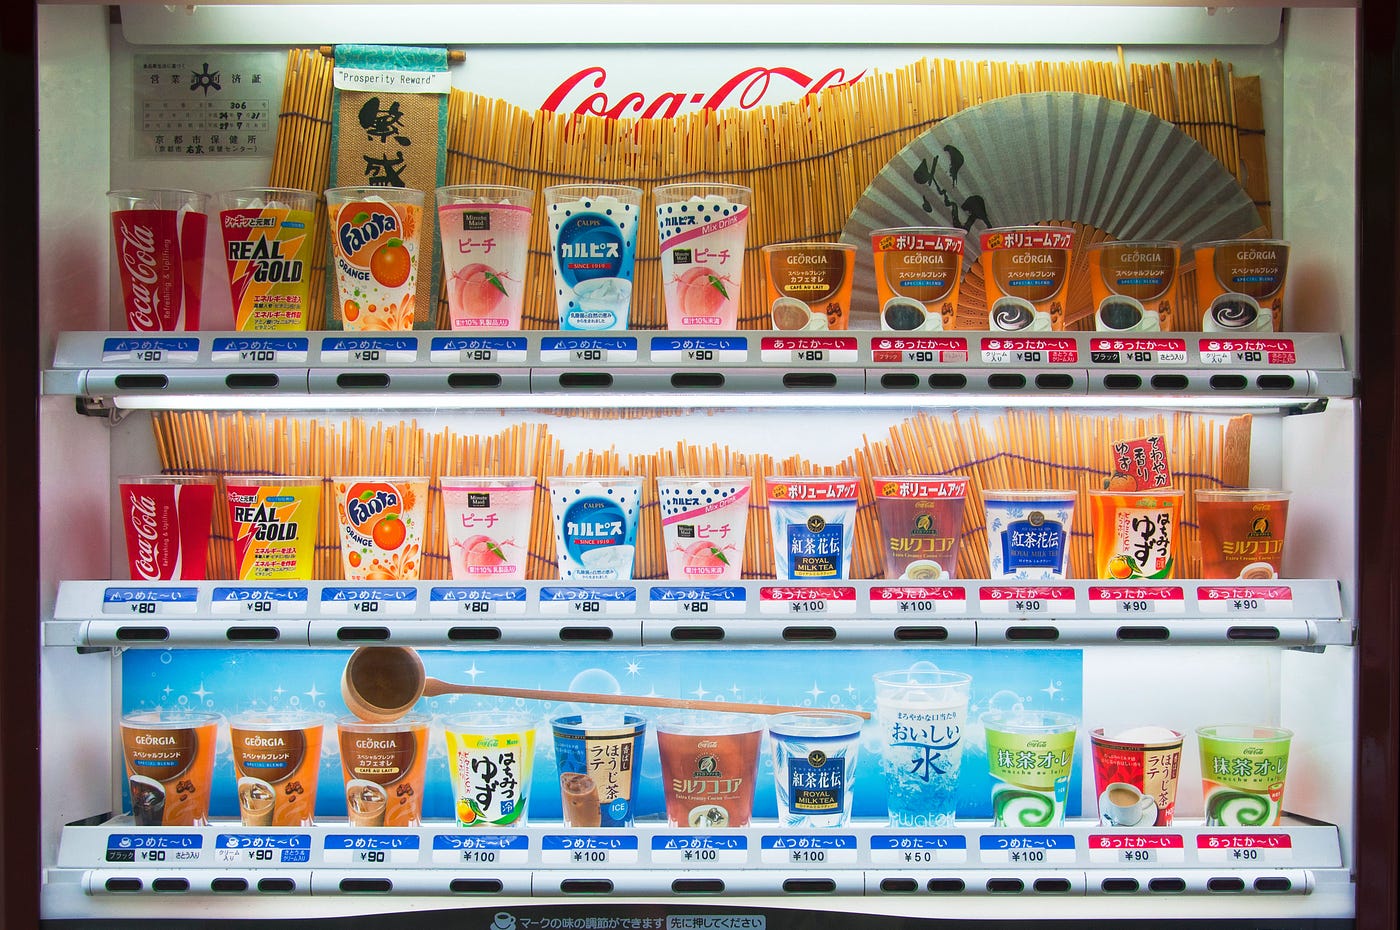 Japanese Vending Machines Sell All Kinds of Things — Some